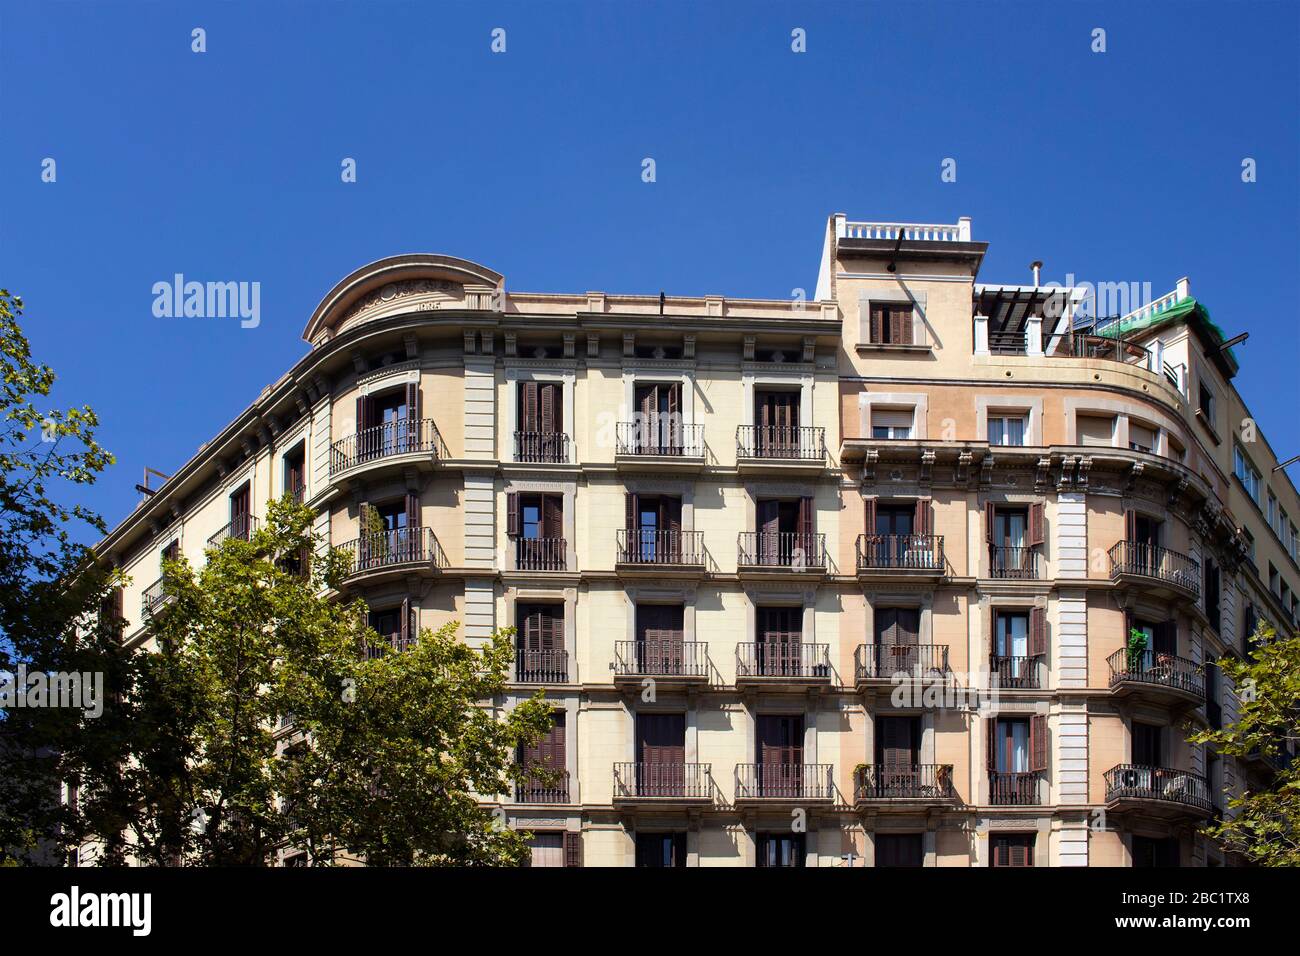 View of traditional, historical, typical residential buildings in ...